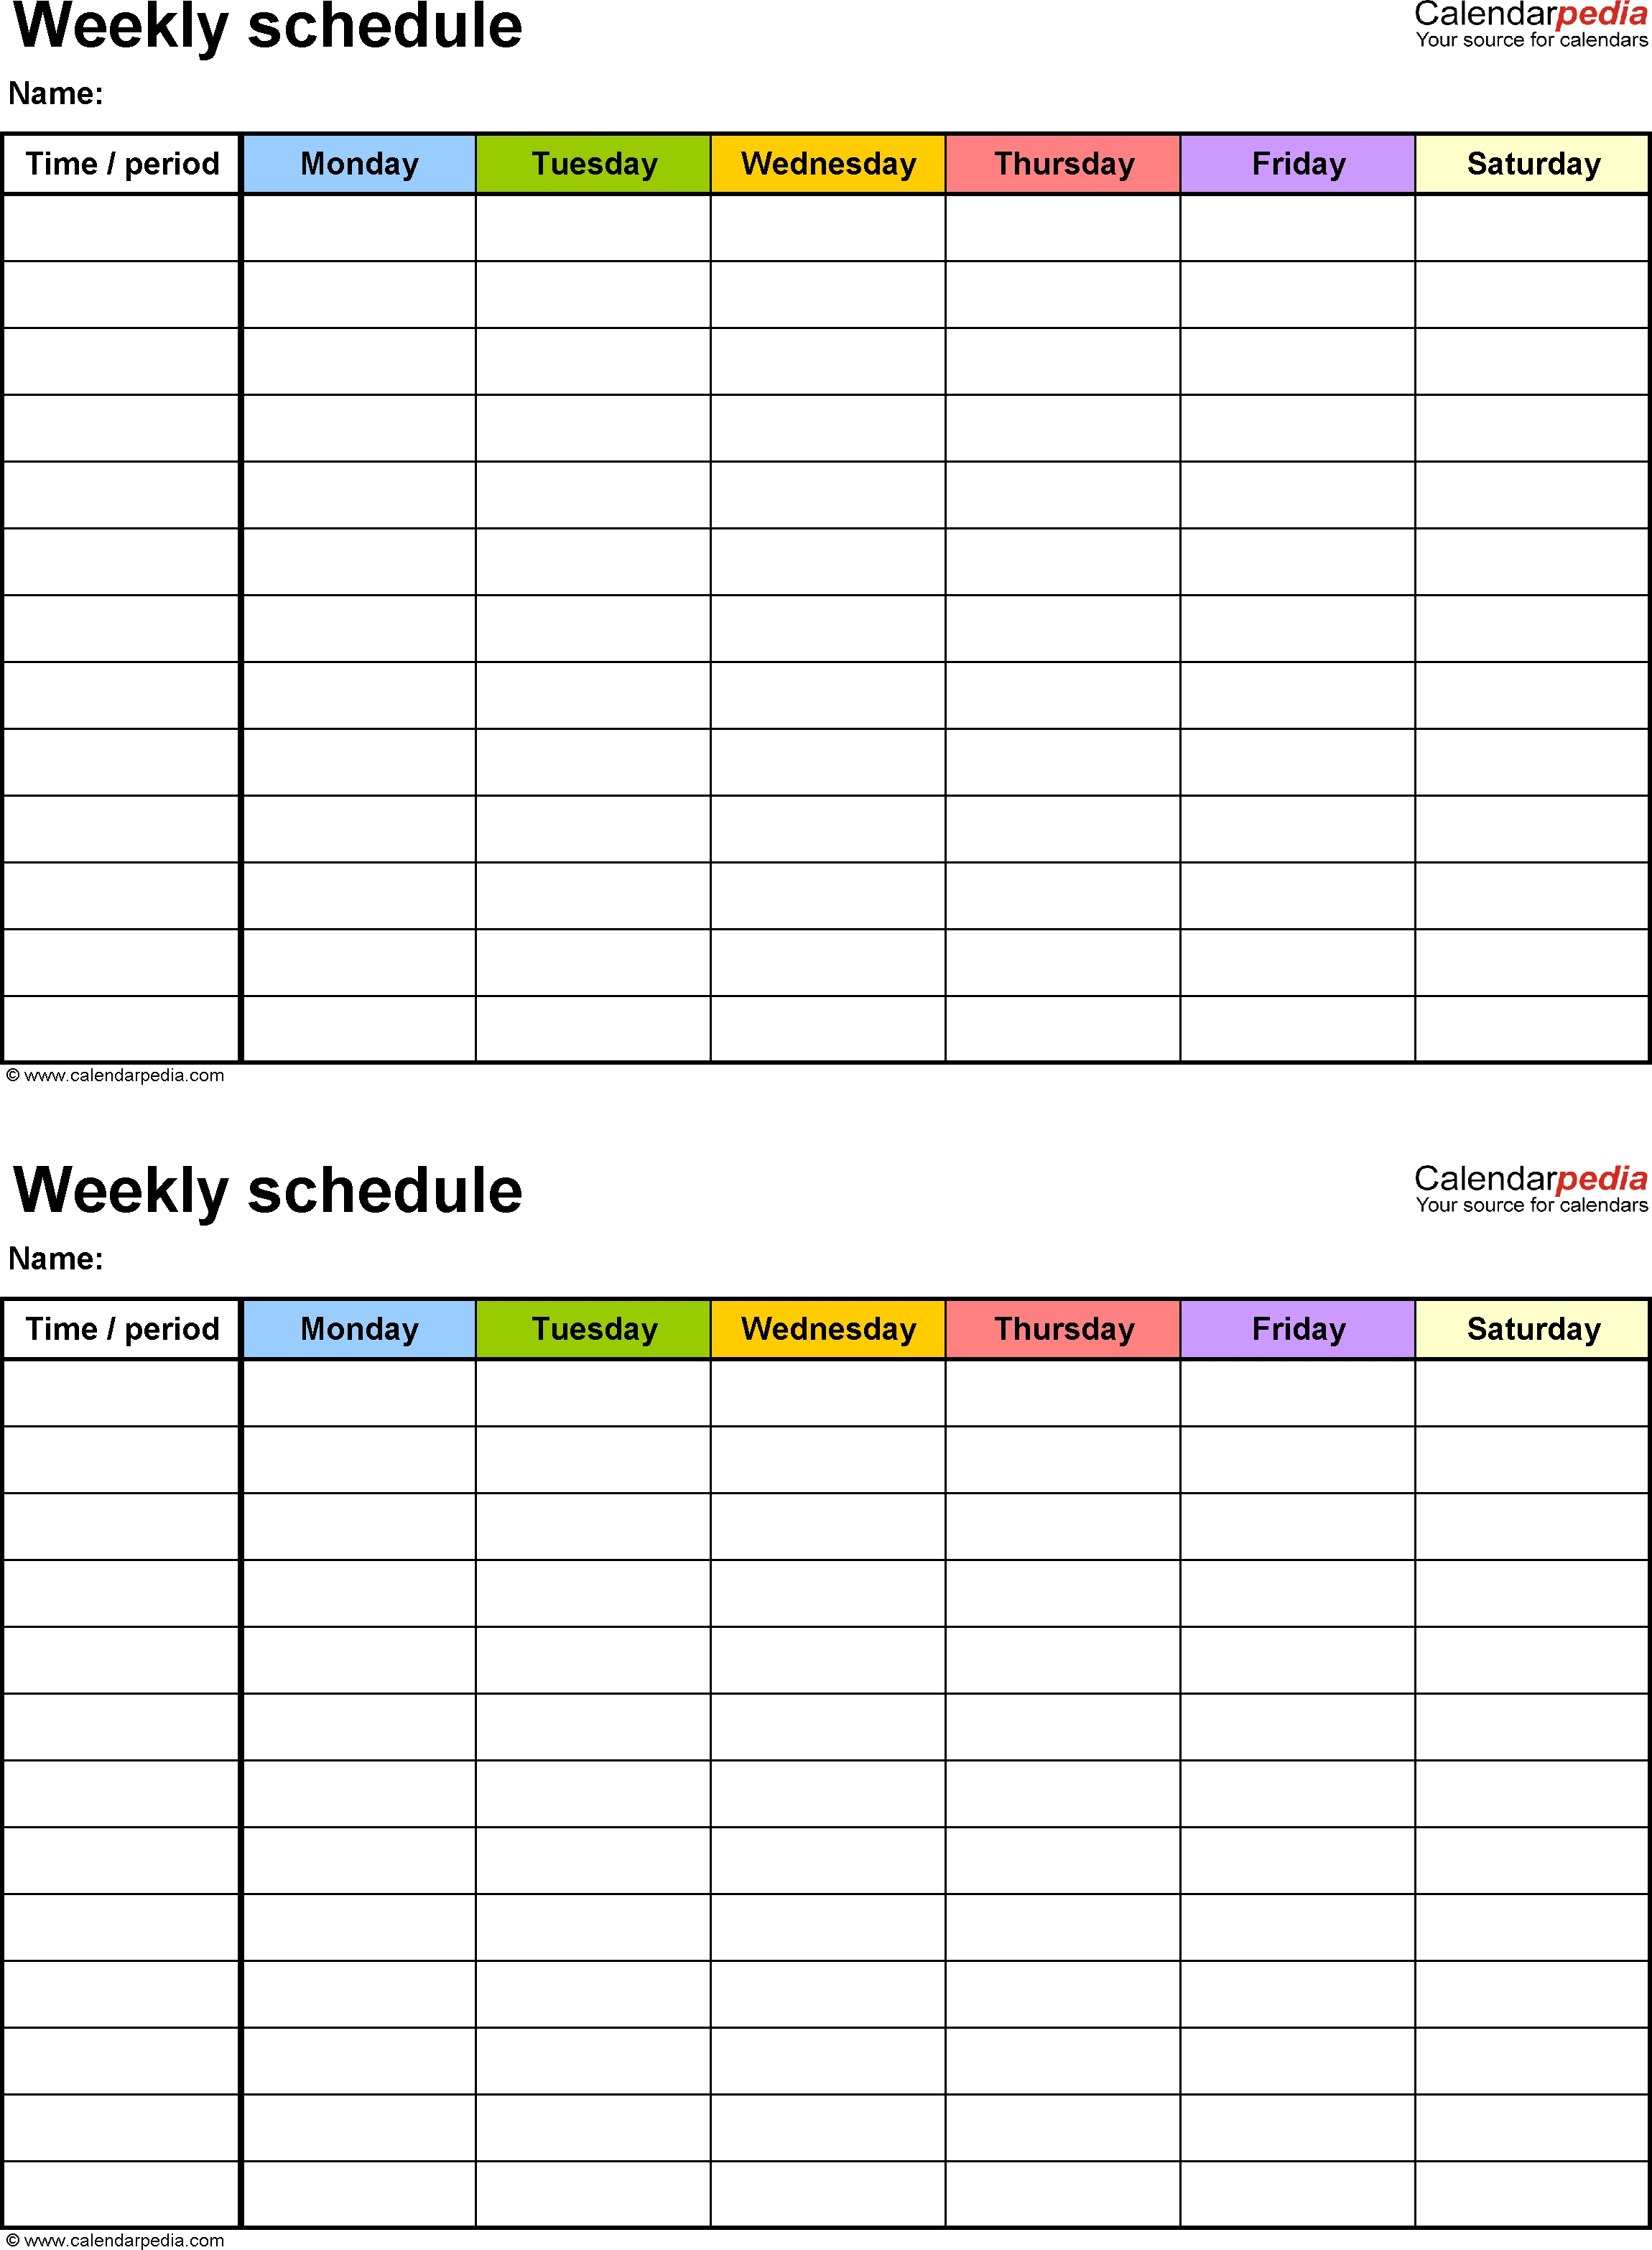 Free Weekly Schedule Templates For Word - 18 Templates regarding Blank Two Week Schedule Template